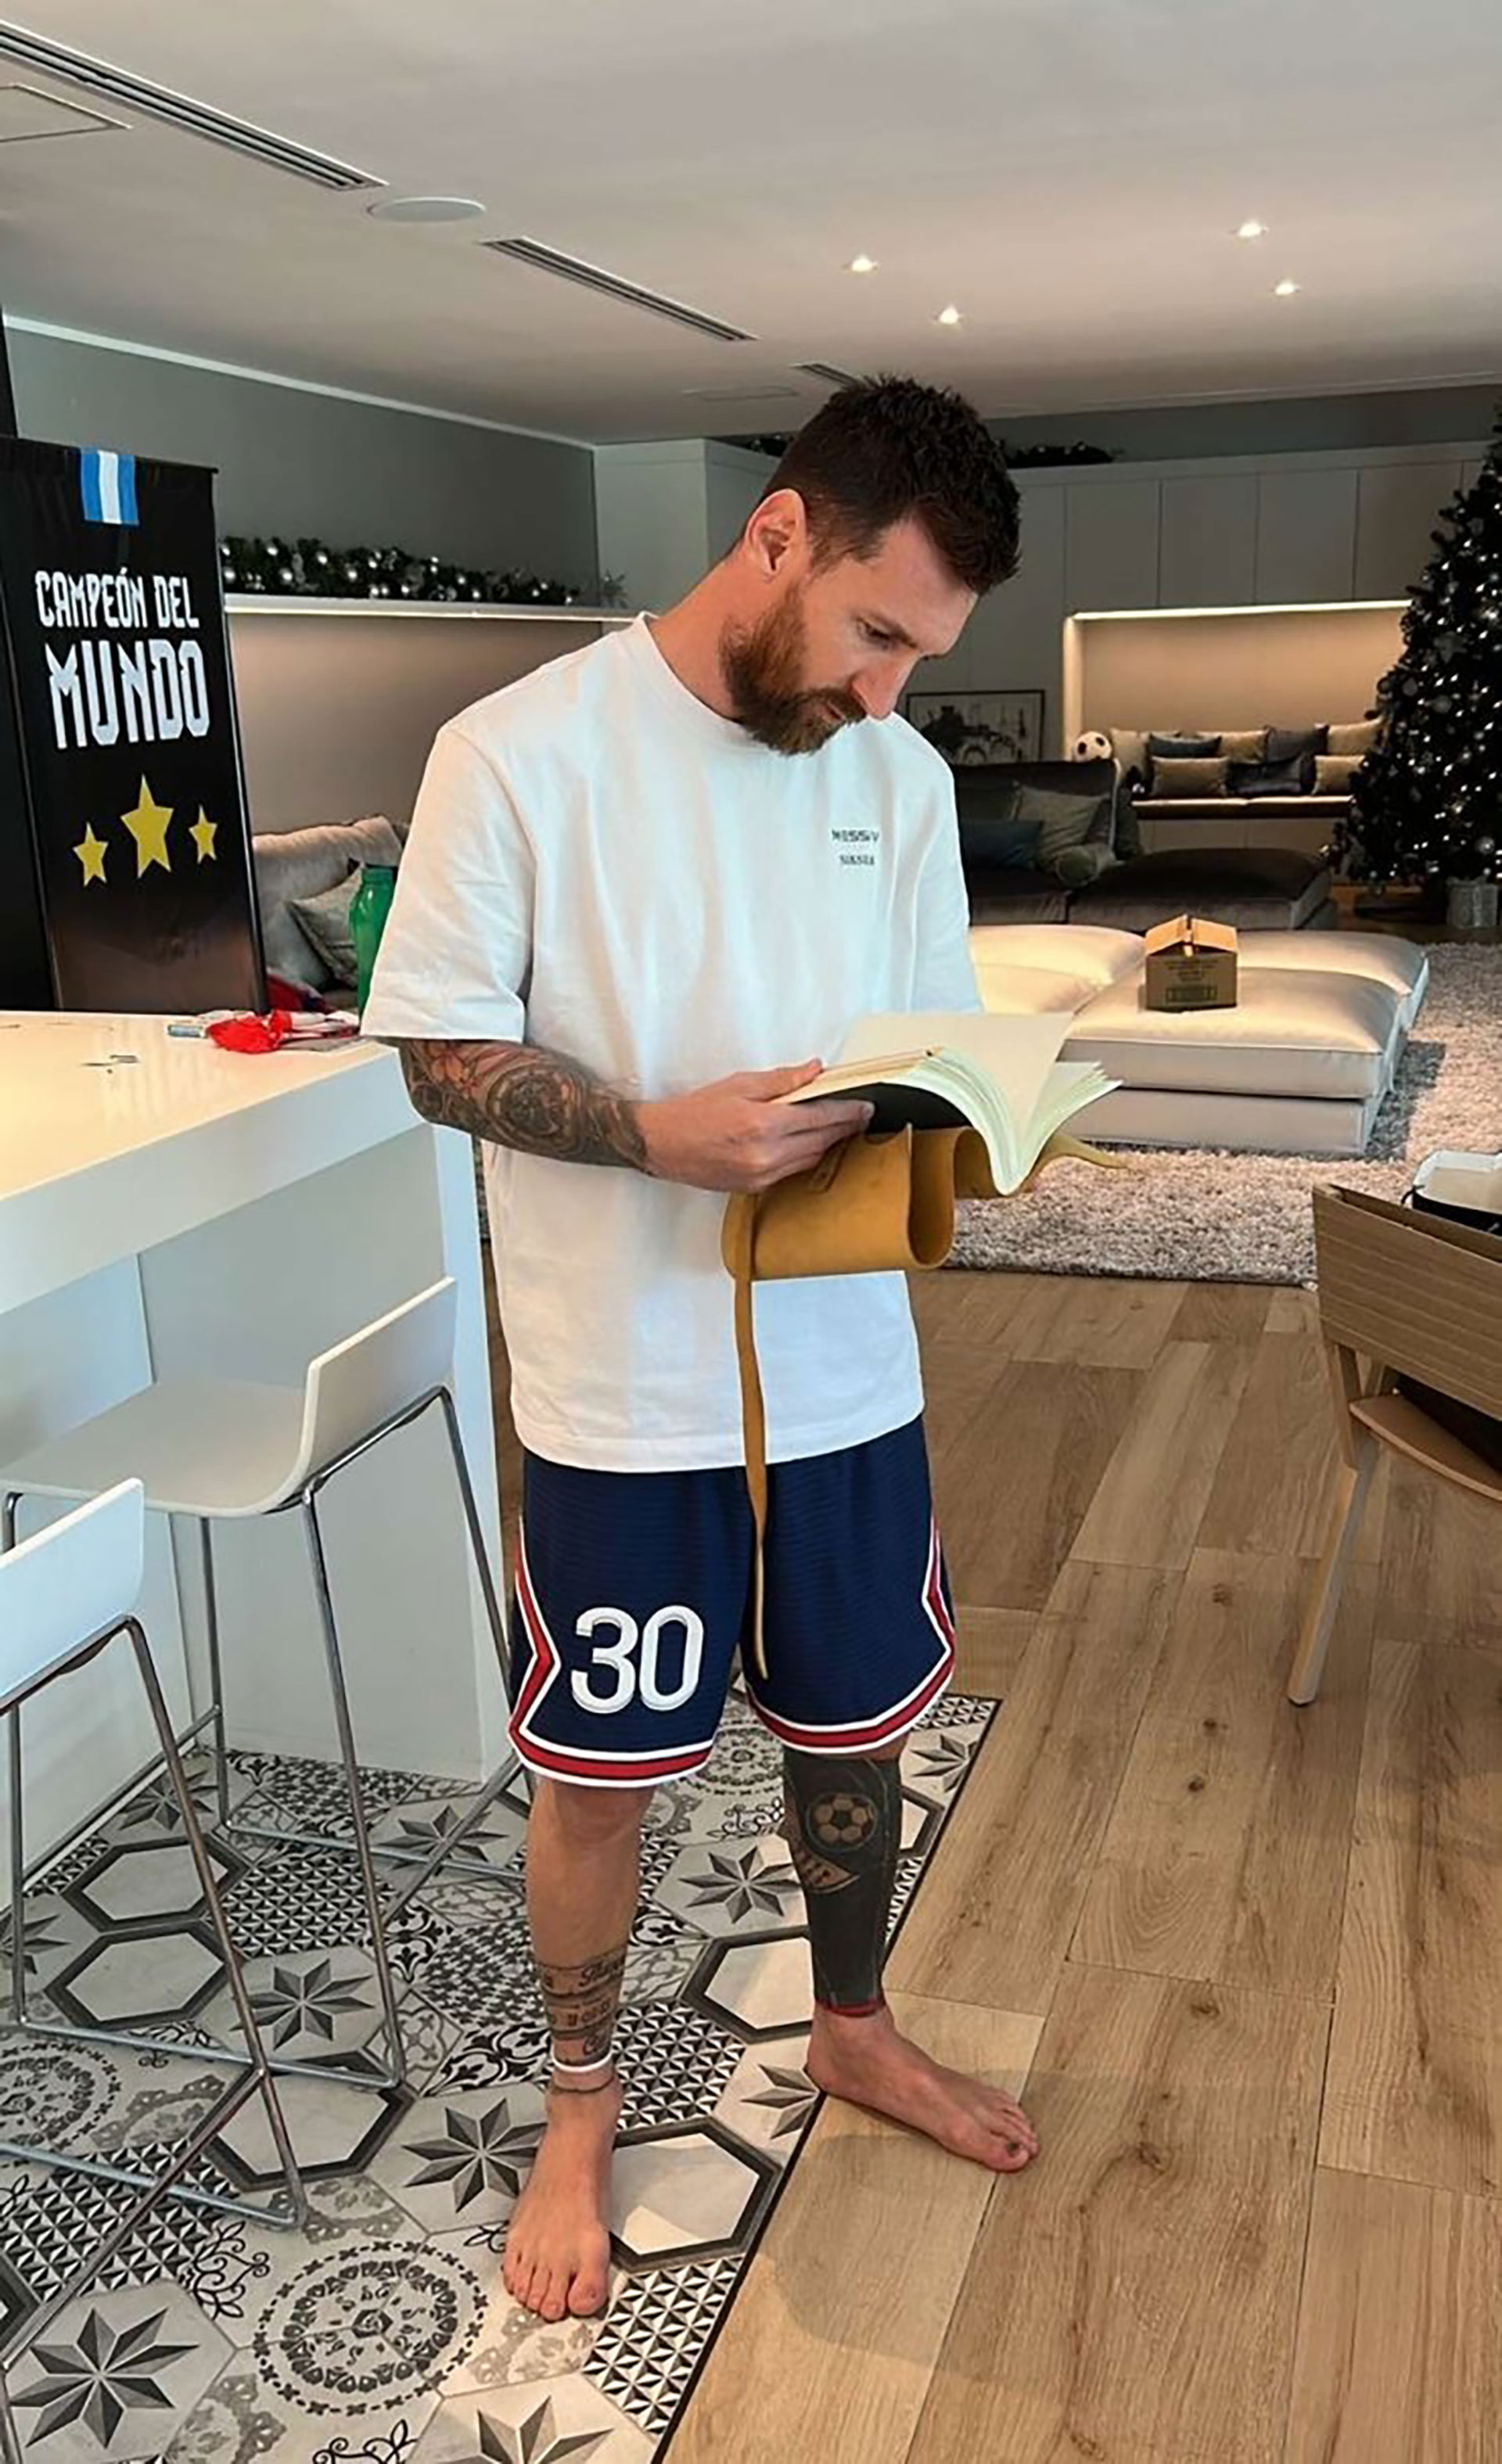 Messi reviewed the messages with a smile